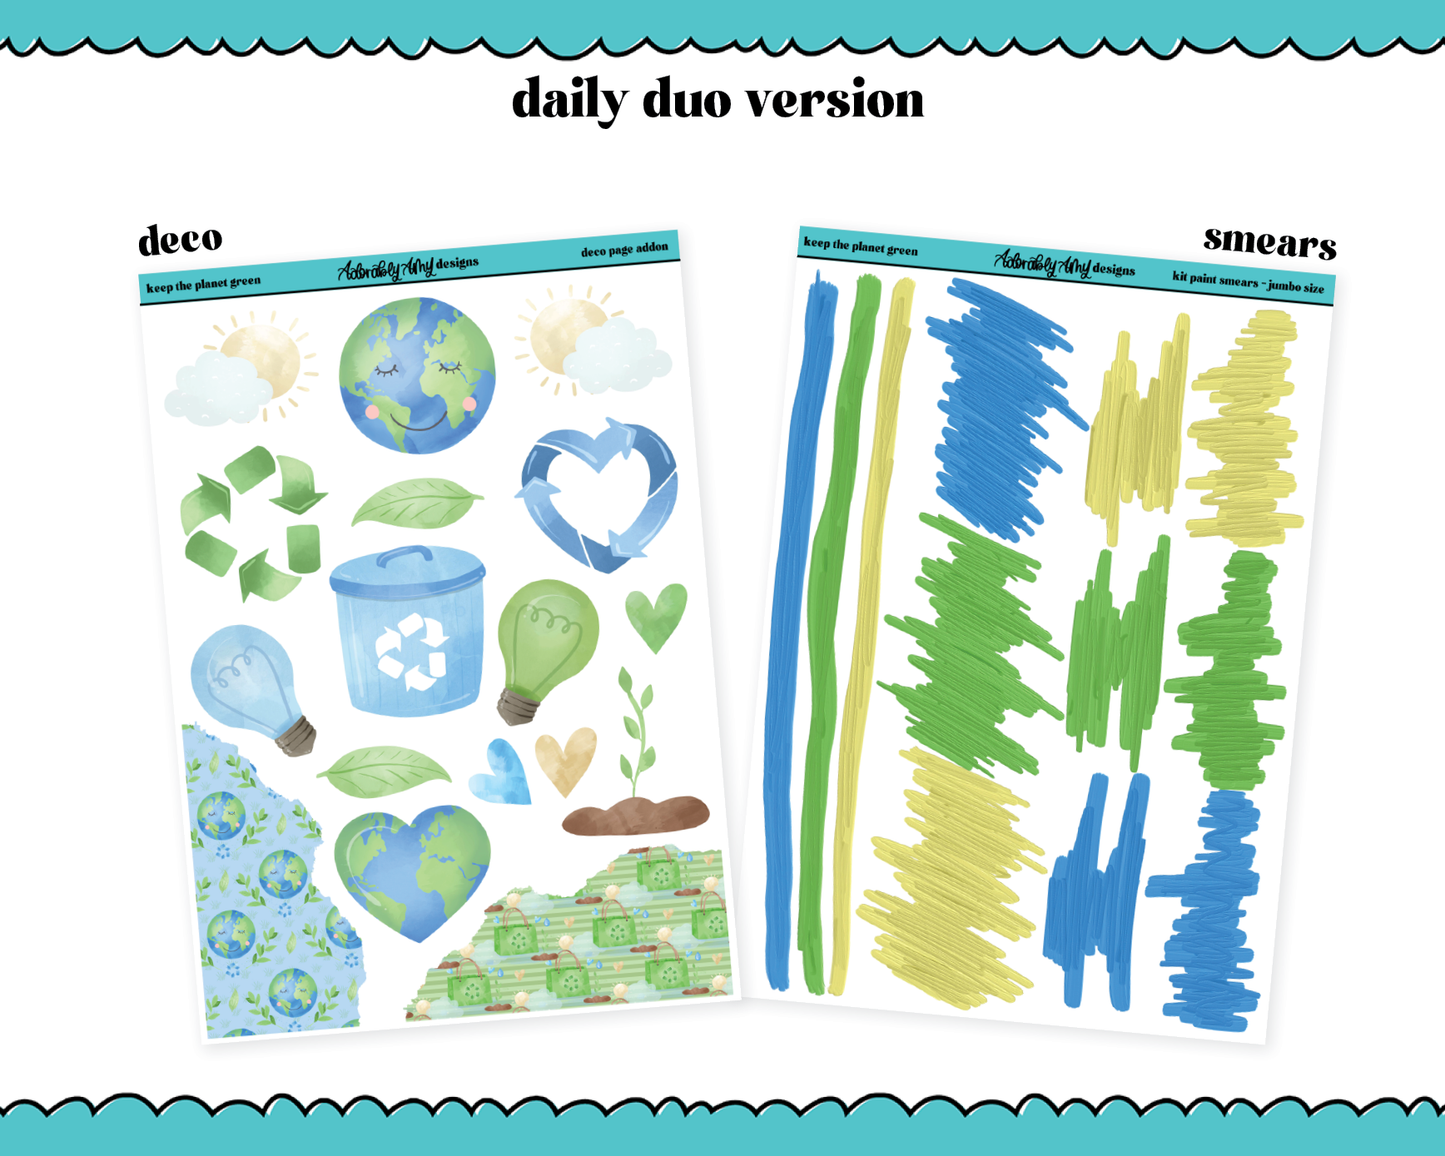 Daily Duo Keep the Planet Green Watercolor Weekly Planner Sticker Kit for Daily Duo Planner